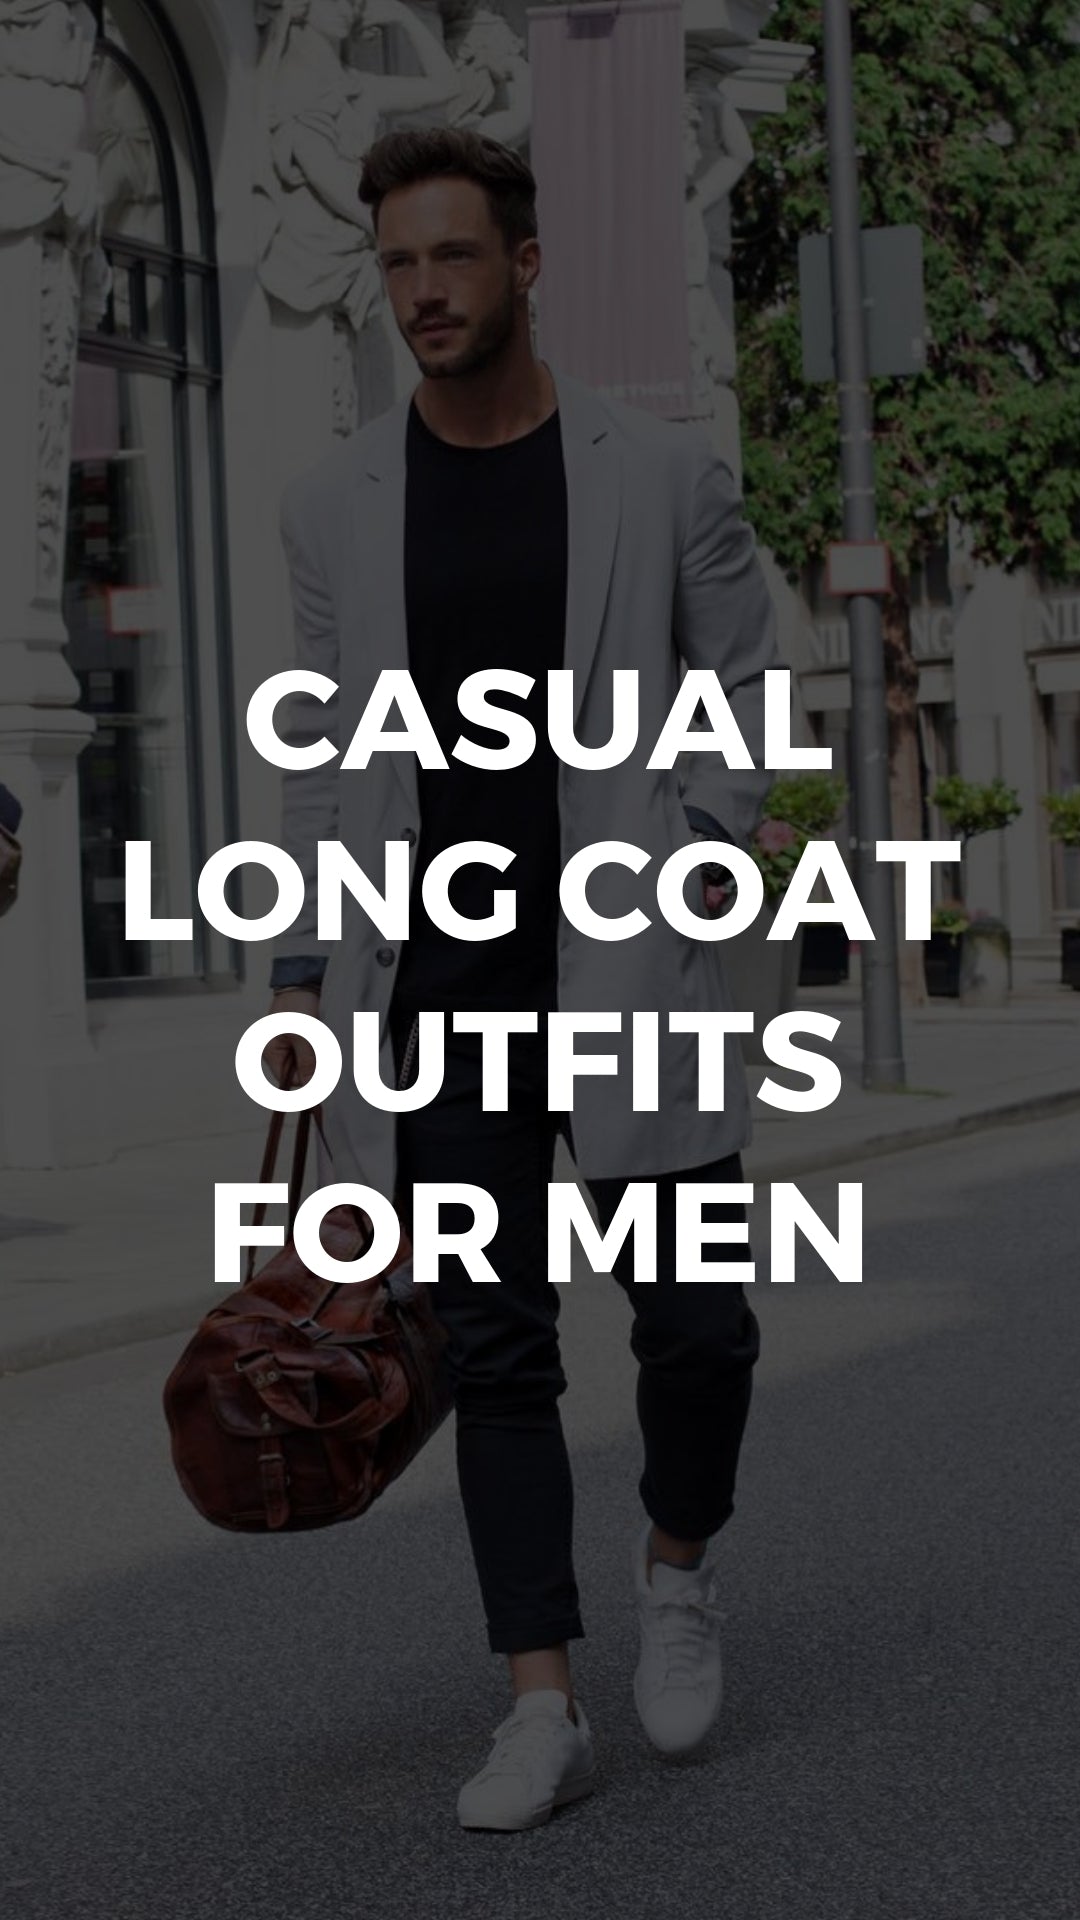 10 Ways To Wear Your Favourite Tee With An Overcoat #tshirt #longcoat #outfits #mensfashion #casual #streetstyle